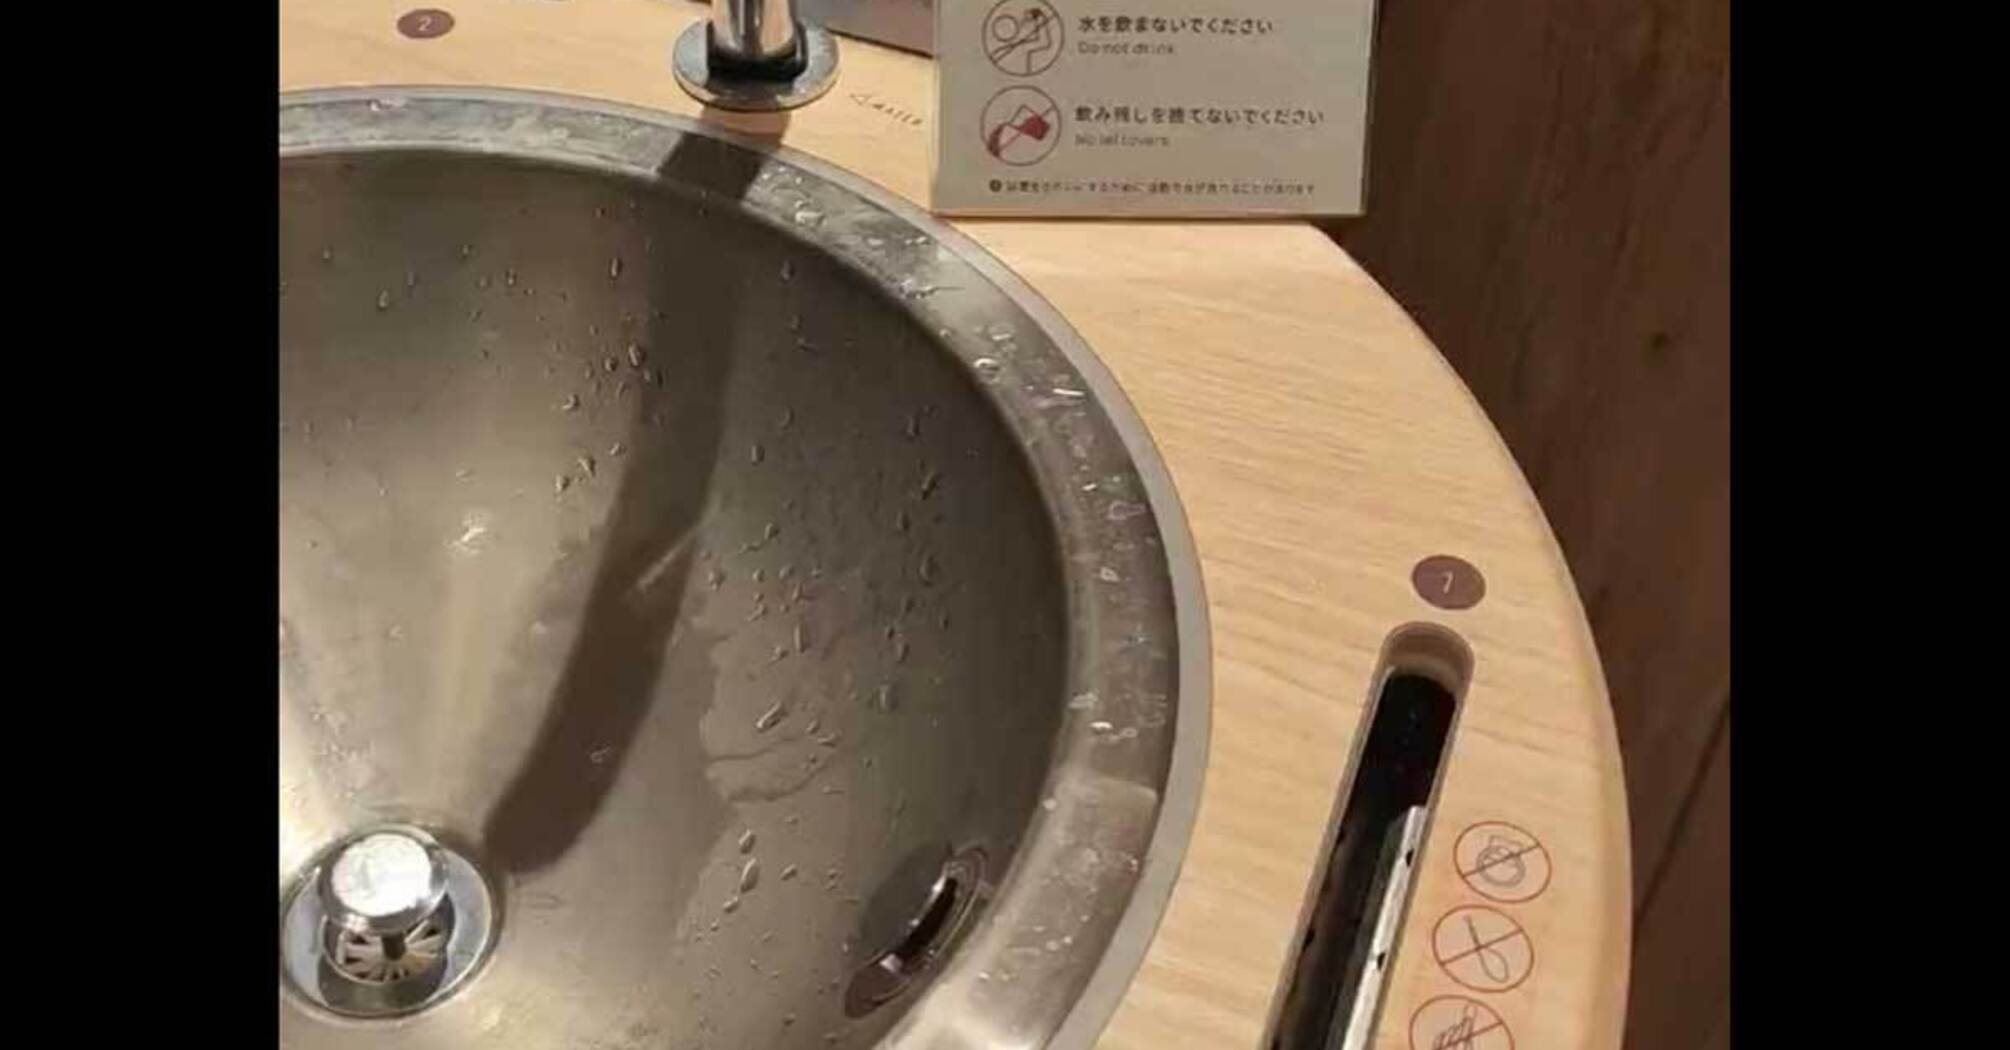 Japanese McDonald's surprised visitors with innovative toilet solutions